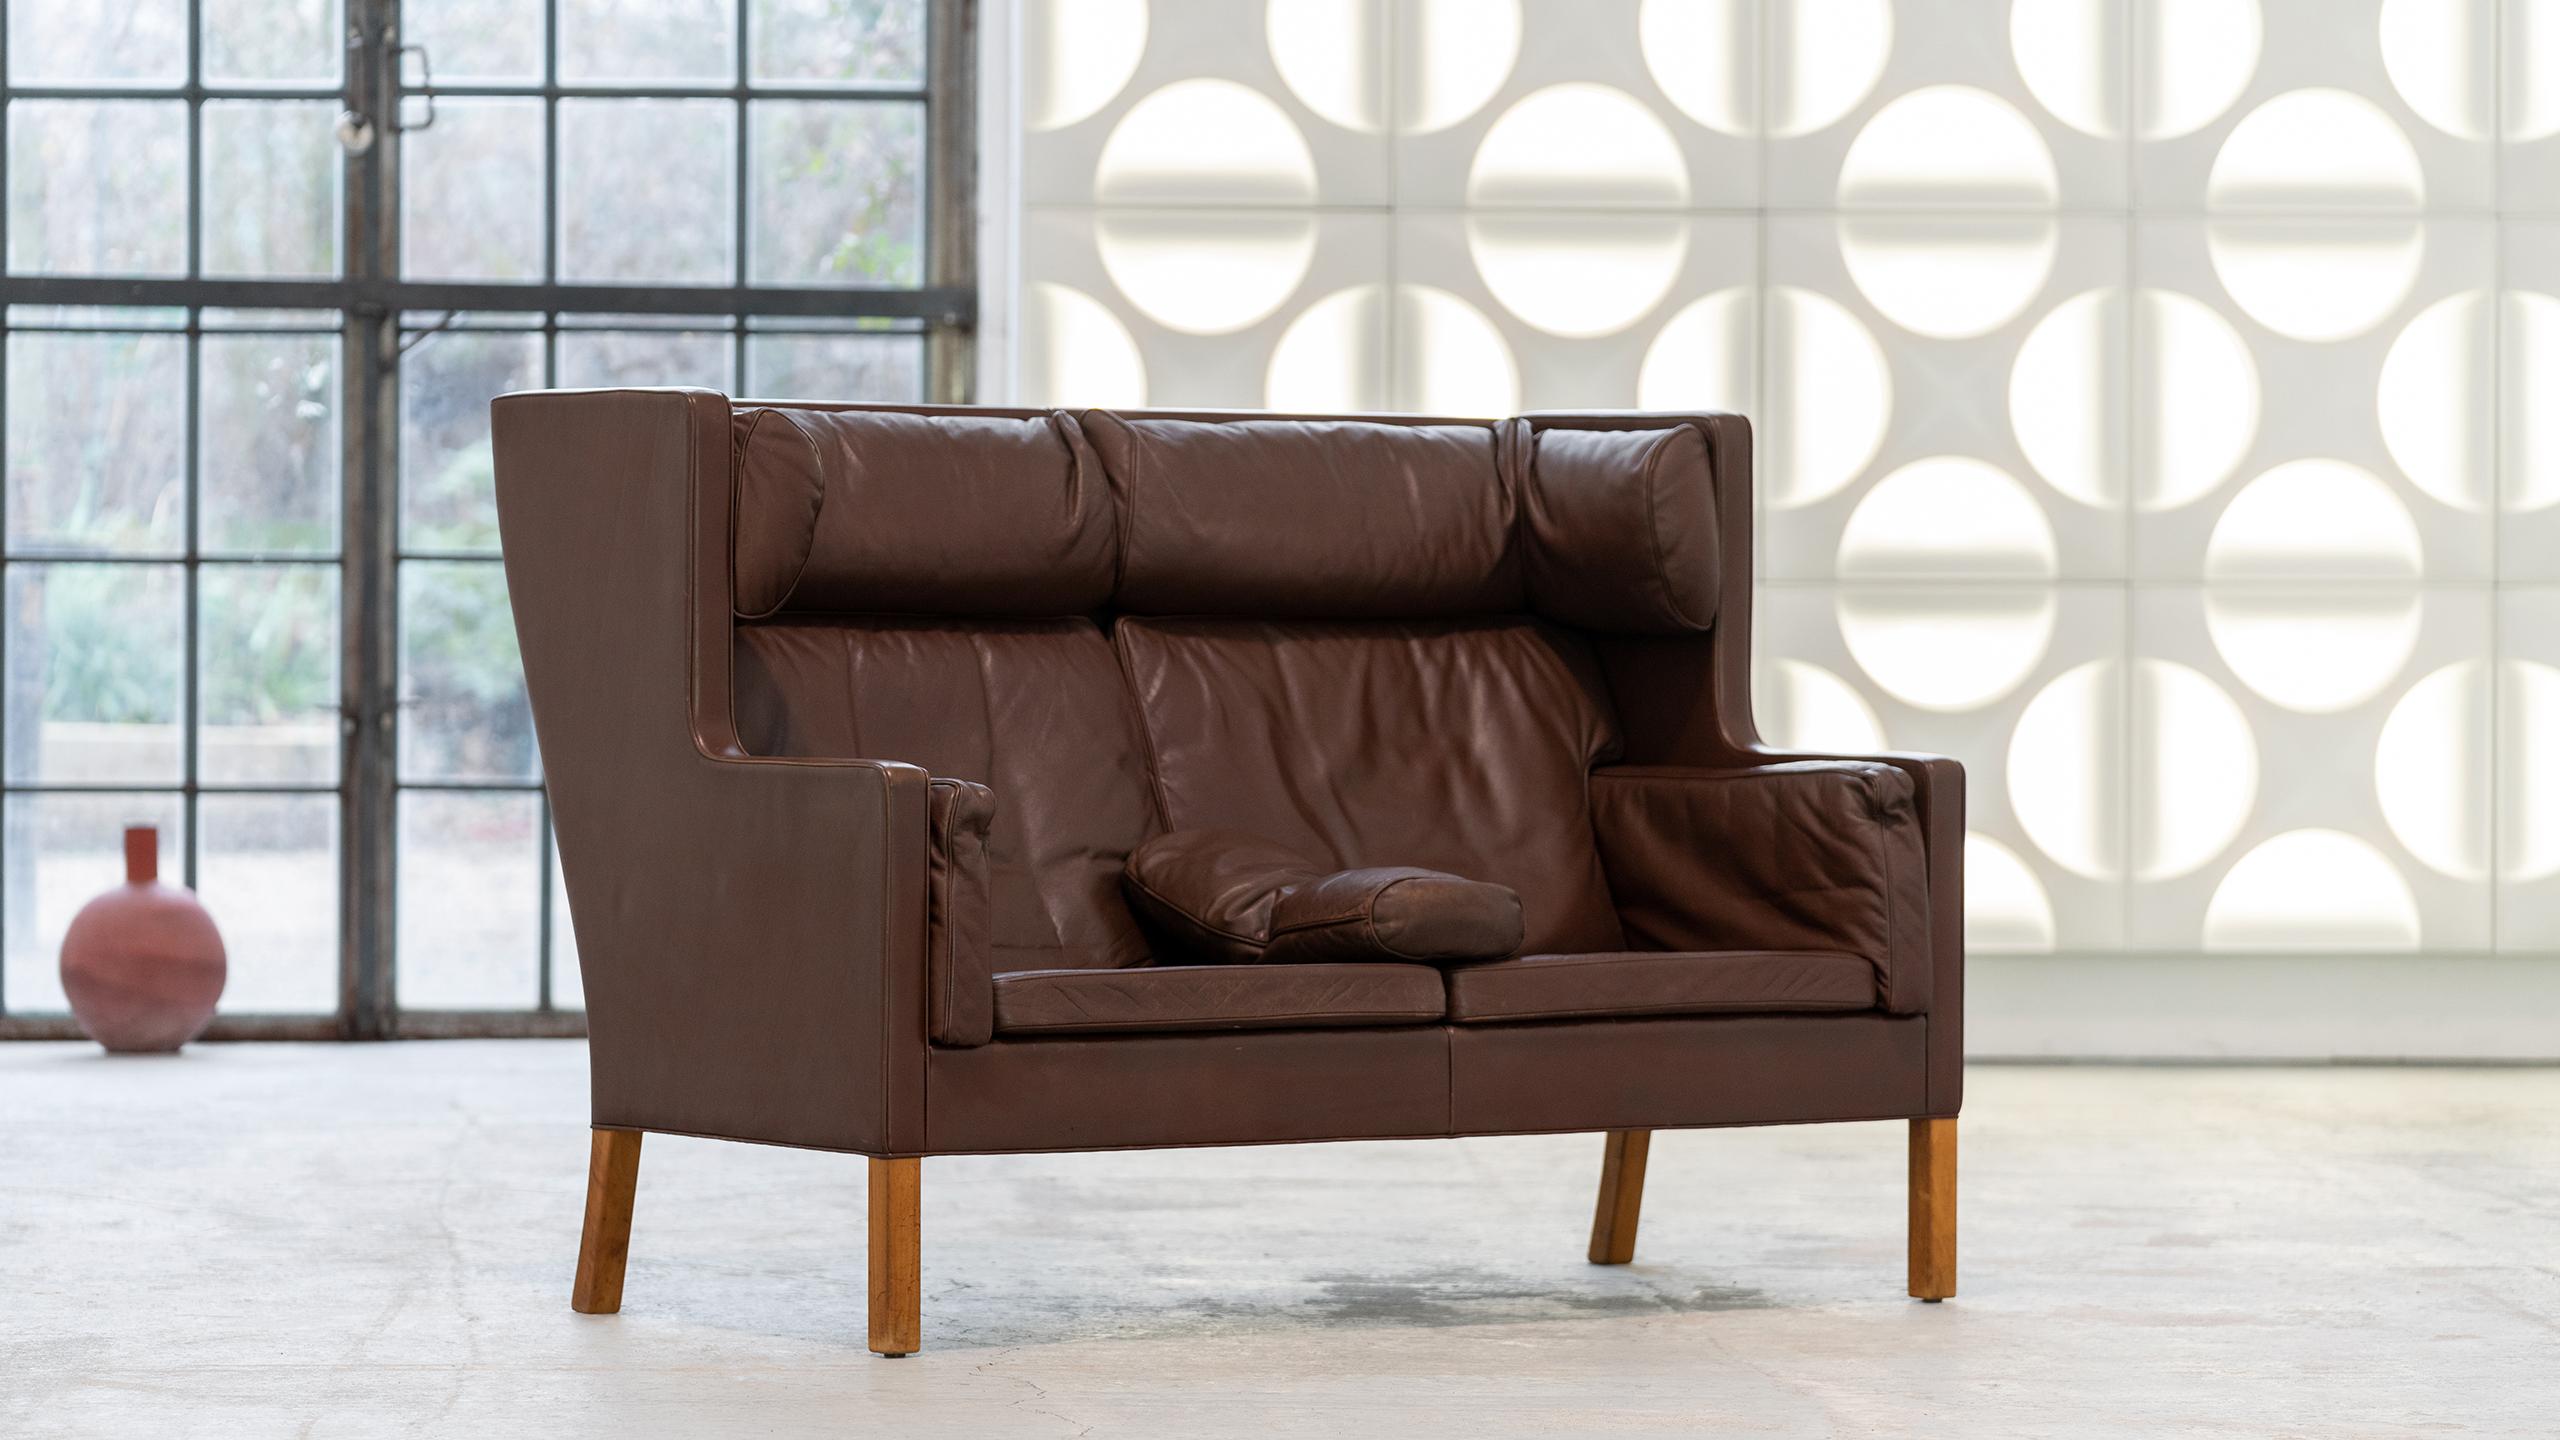 Børge Mogensen, Coupé Sofa in Chocolate Leather, 1971 for Fredericia, Denmark For Sale 5